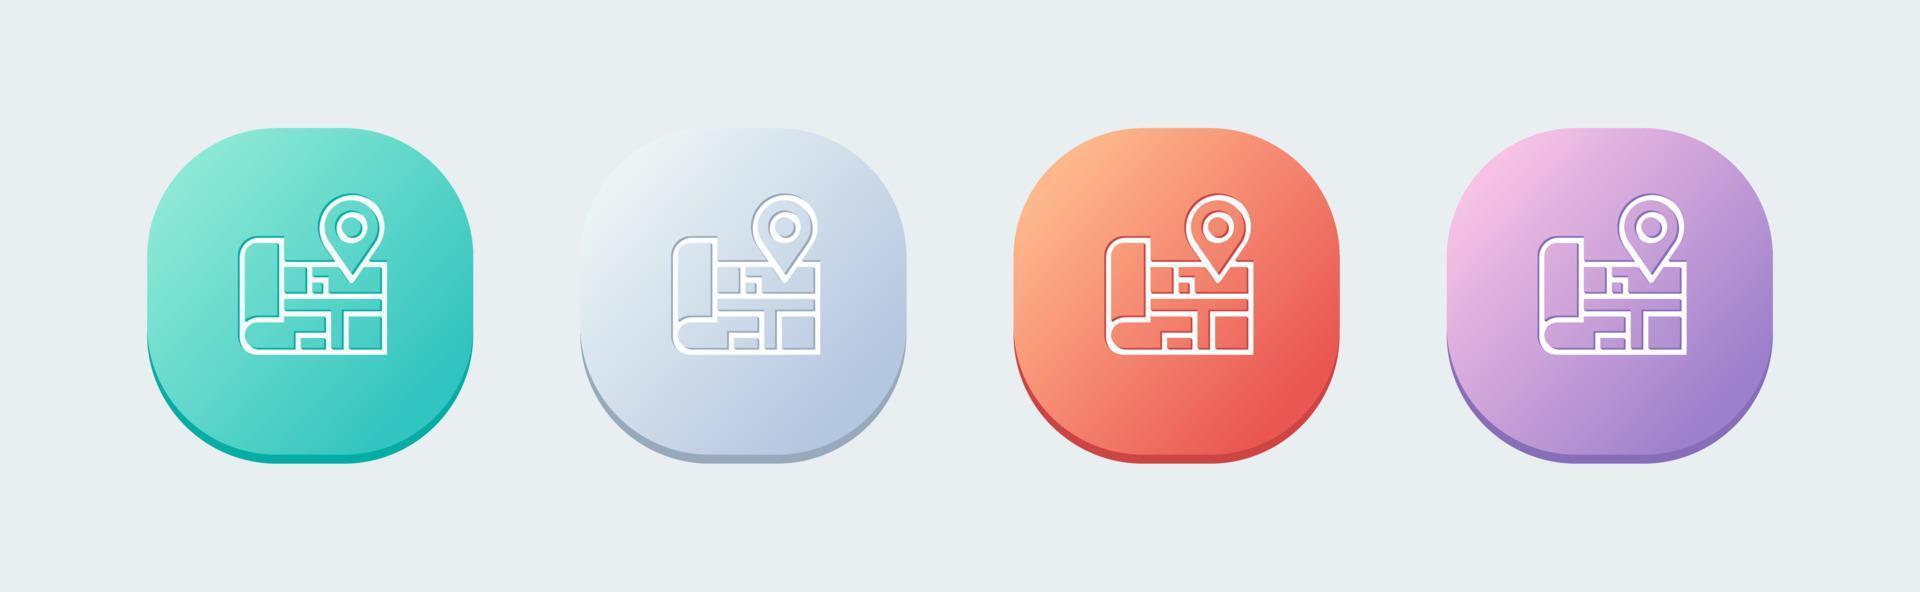 Maps line icon in flat design style. Location pin signs vector illustration.